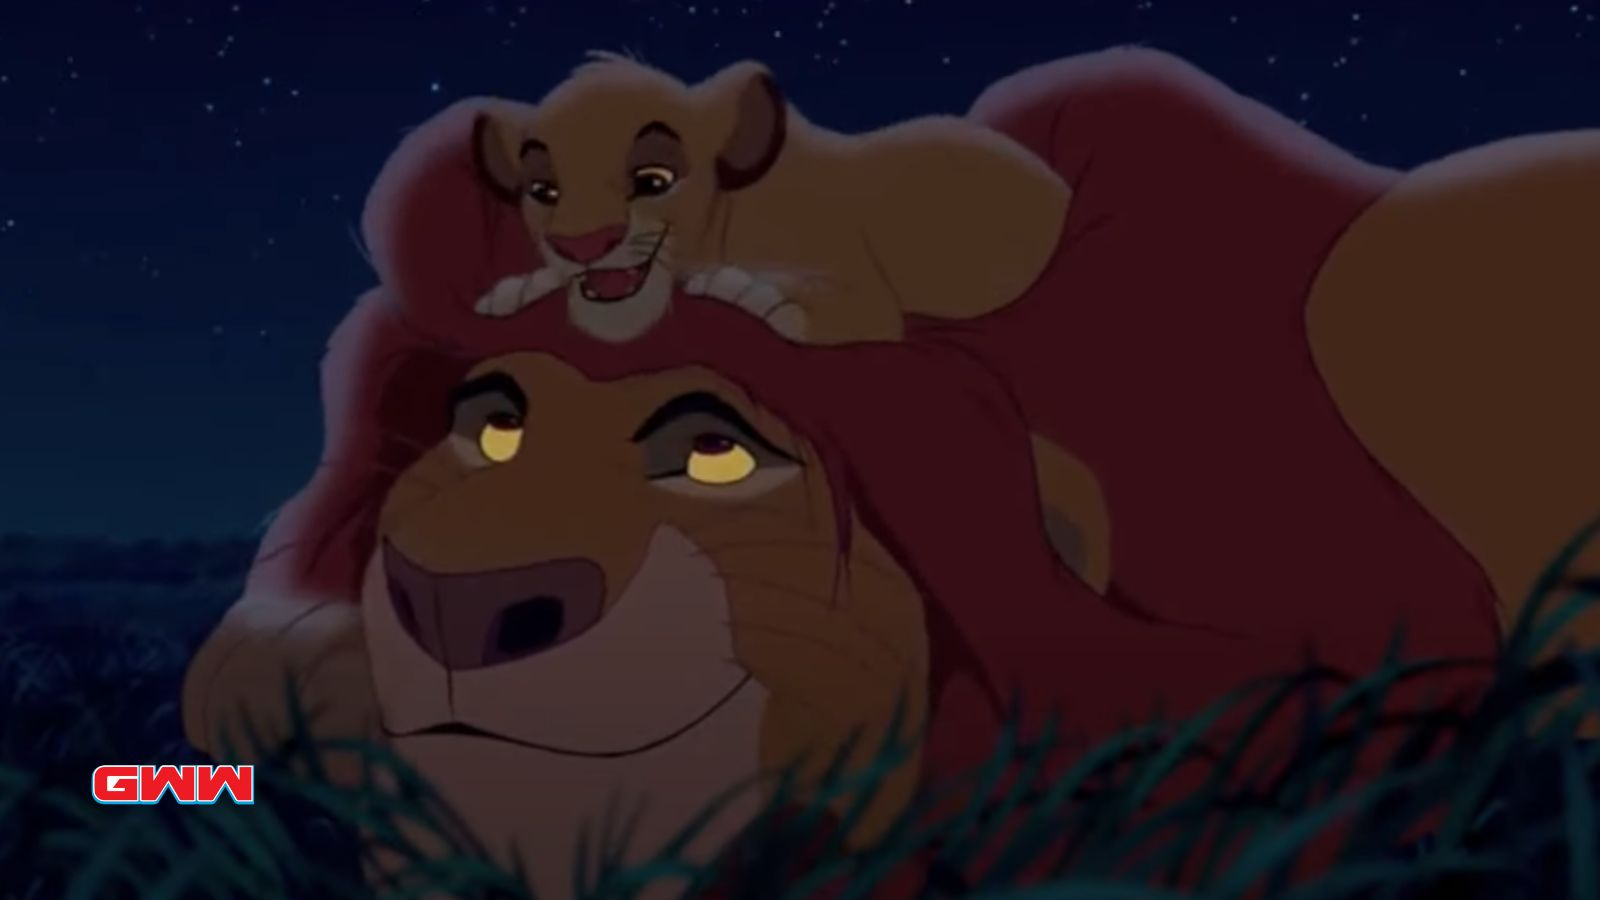 Mufasa letting Simba go above his head to play with him.